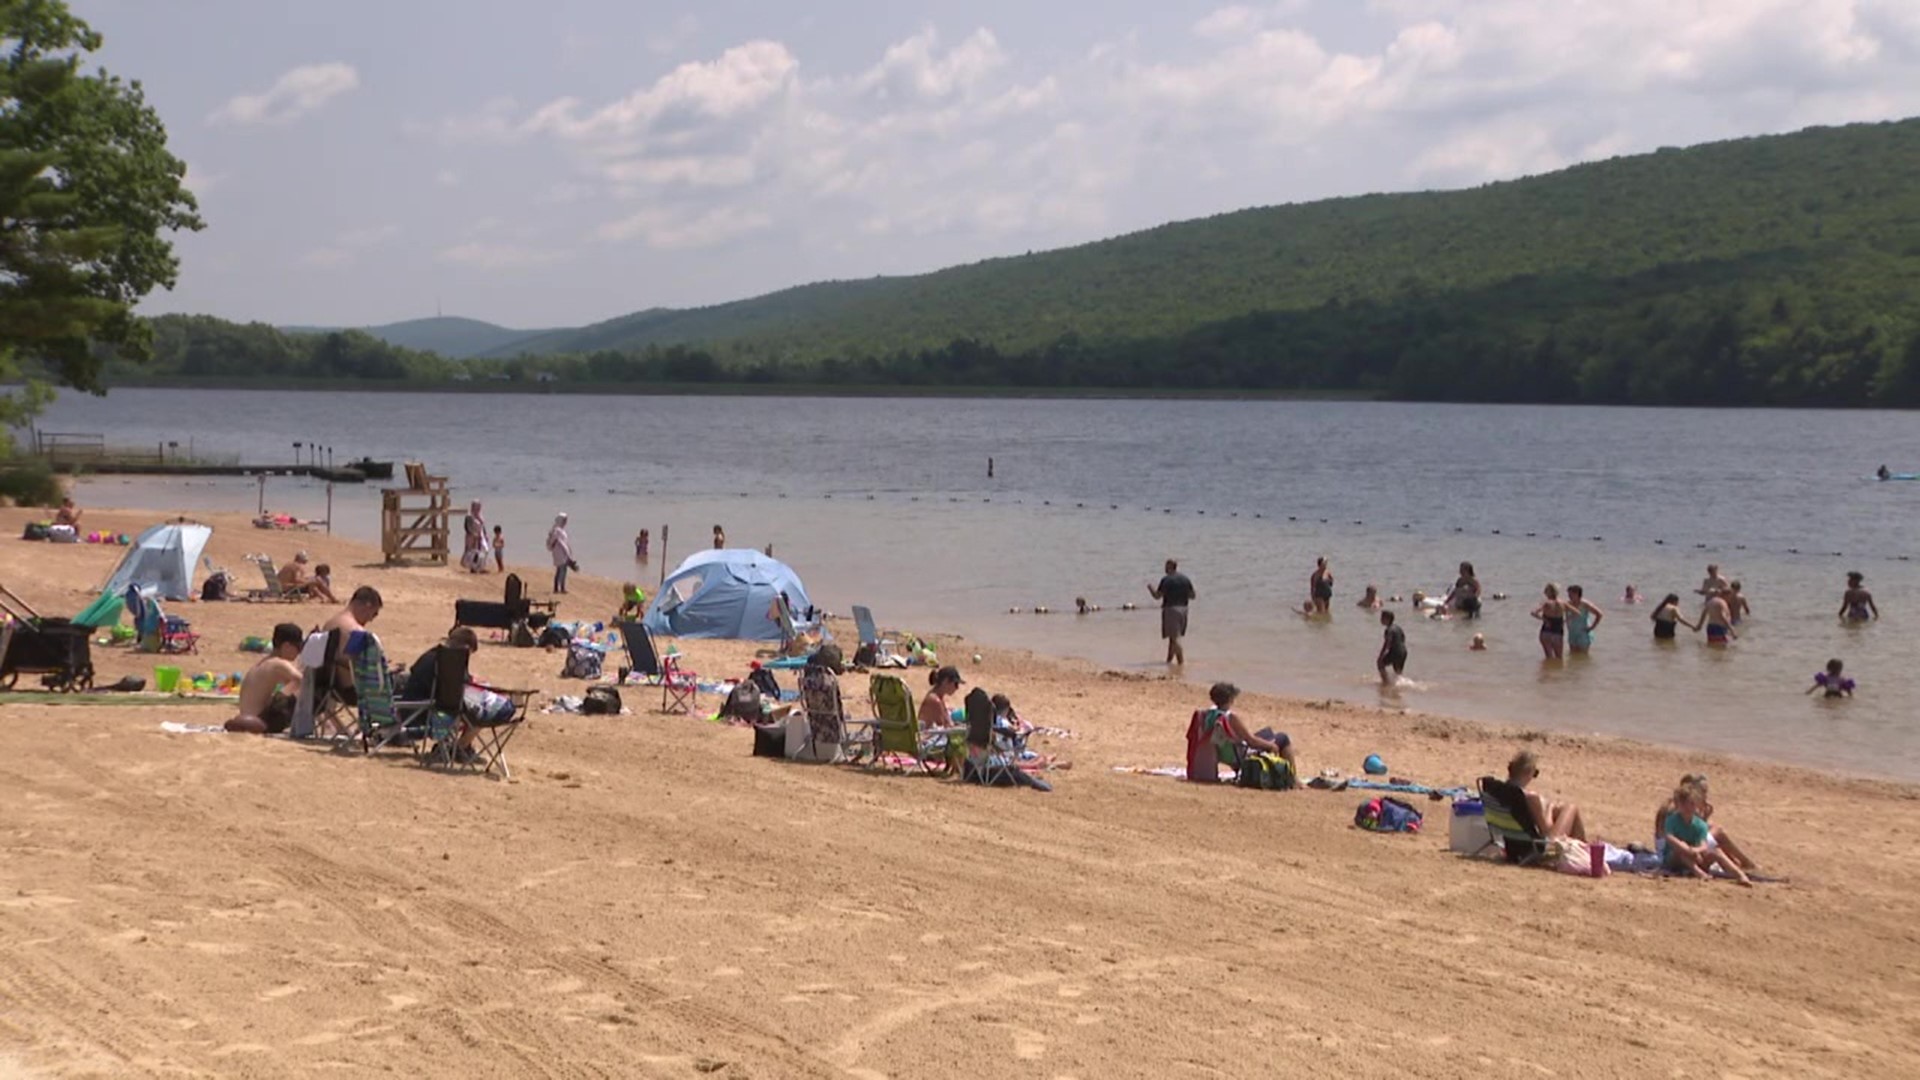 Overcrowding issues at a Carbon County park have prompted plans to keep the same thing from happening at Mauch Chunk Lake just a few miles away.